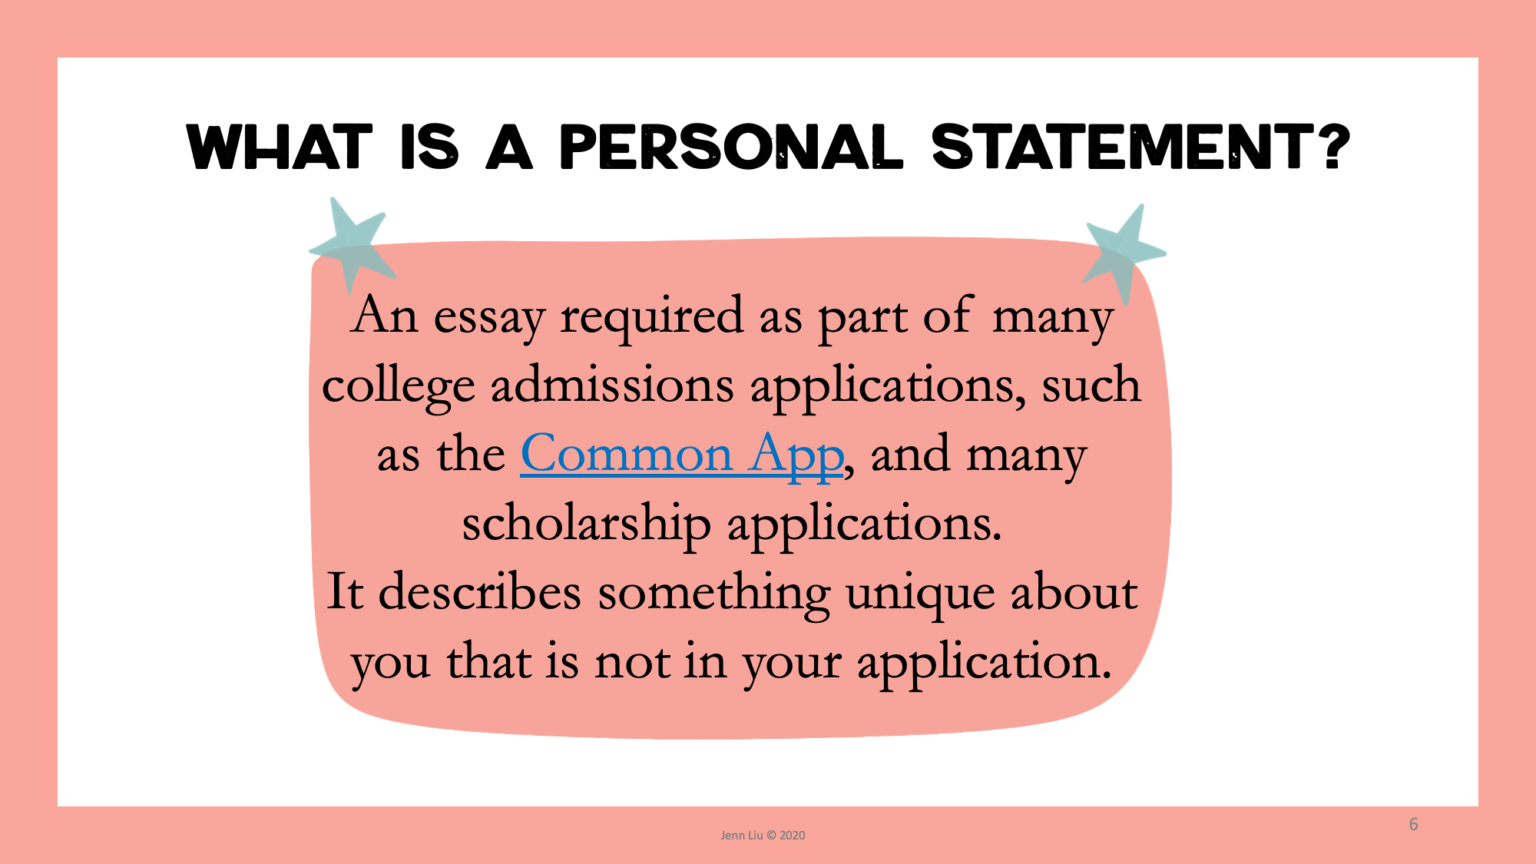 what is the word limit for common app personal statement